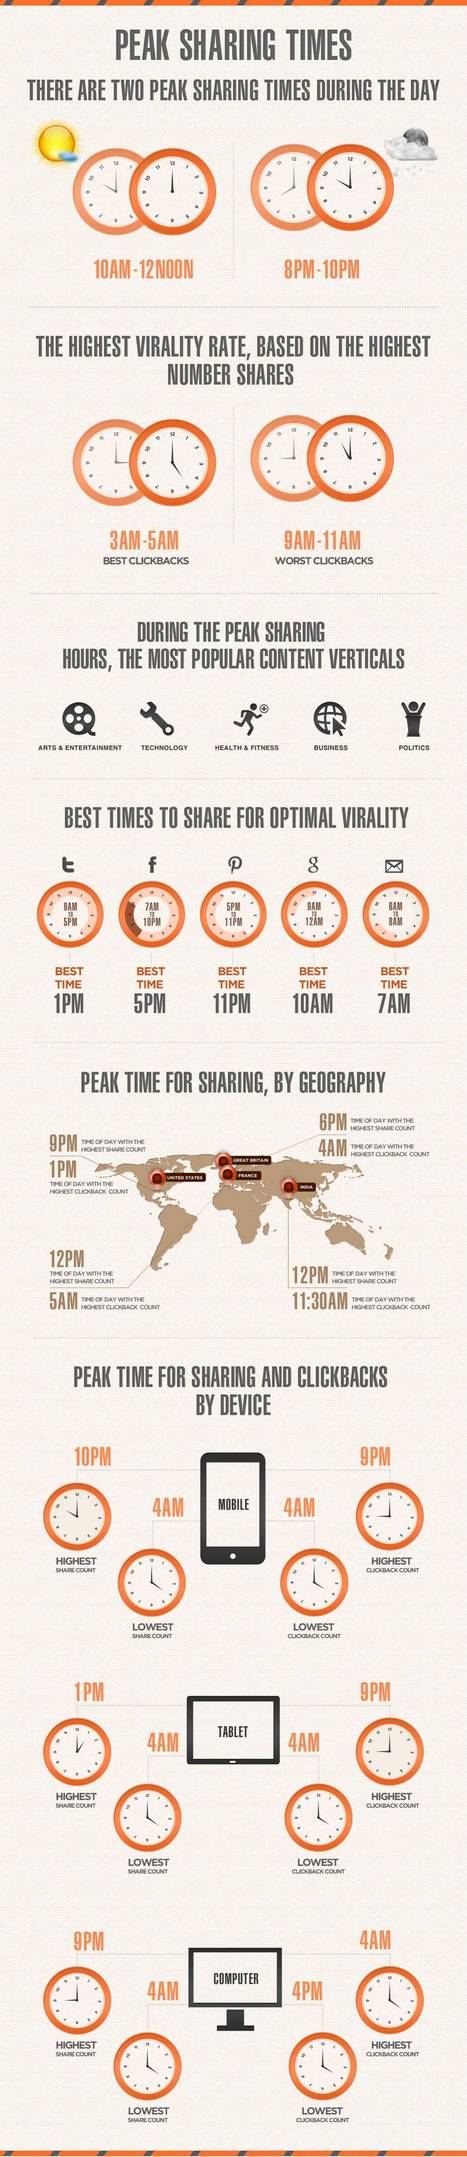 Best Time For Sharing Content [Infographic] | Infographics and Social Media | Scoop.it